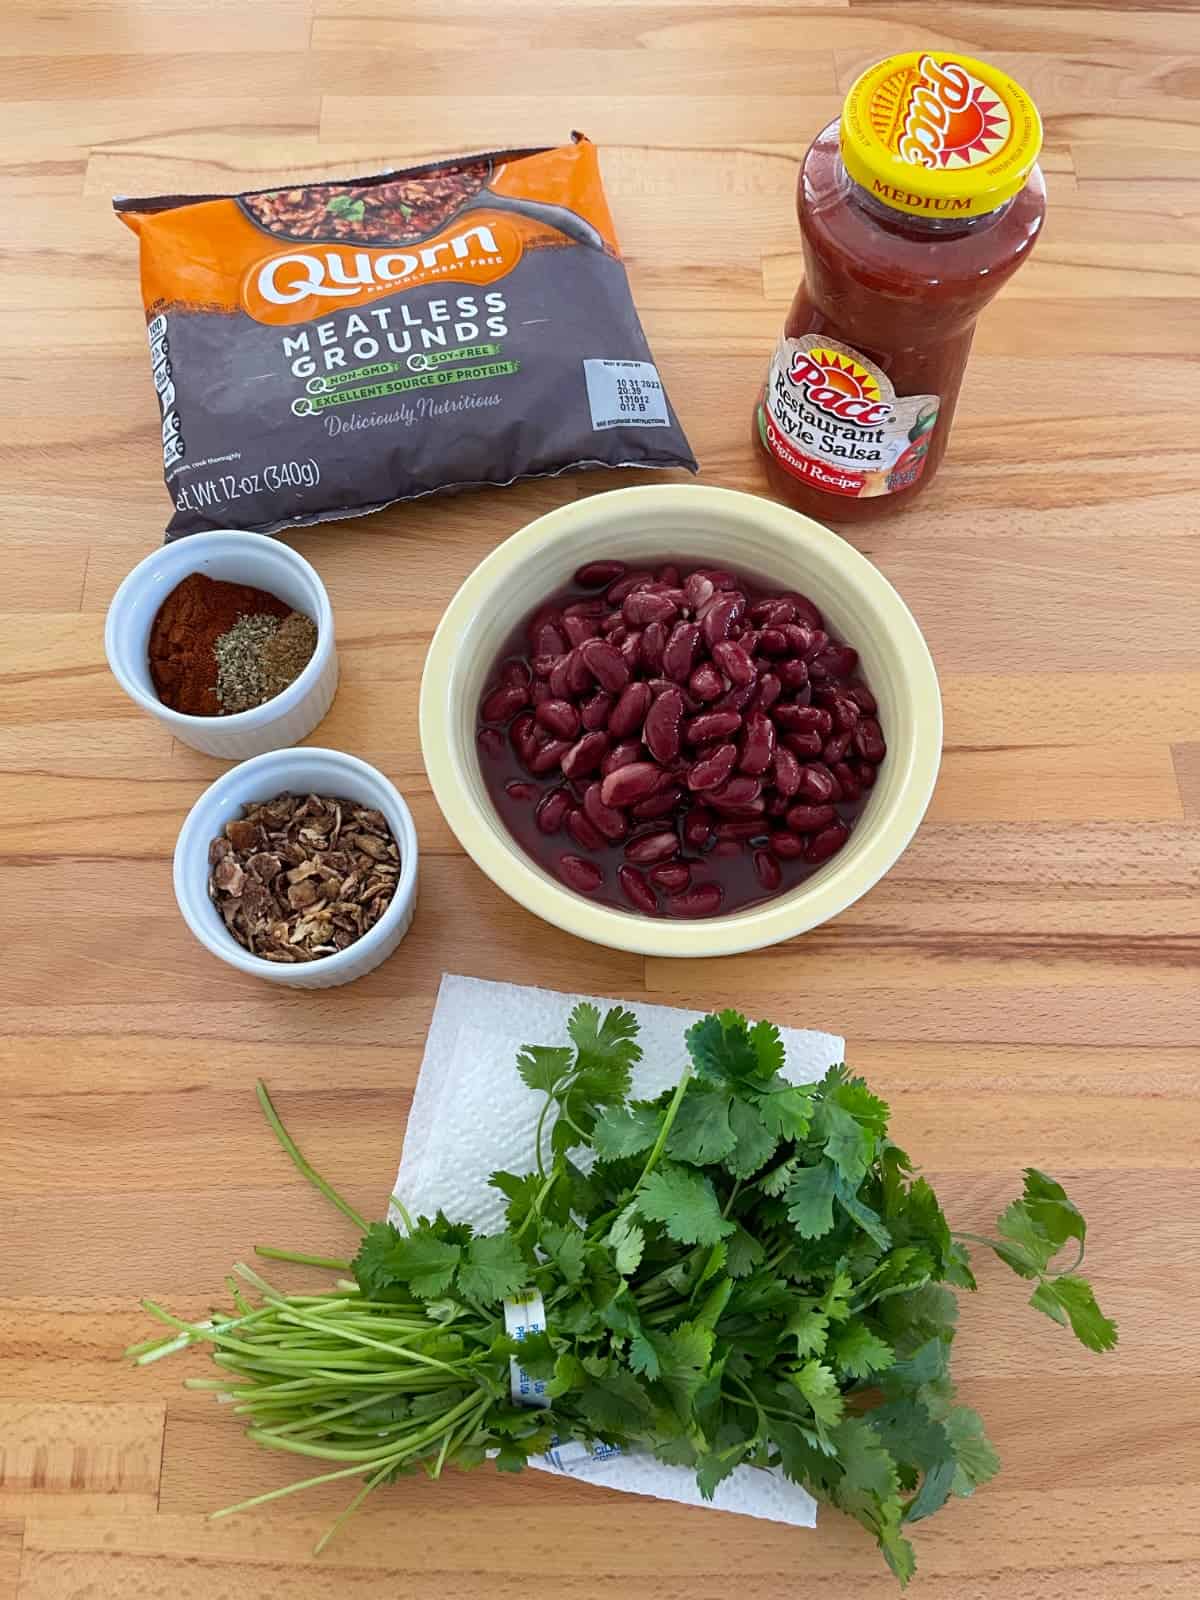 Ingredients for making chili, including Quorn meatless grounds, salsa, beans, spices and fresh cilantro on wood table.